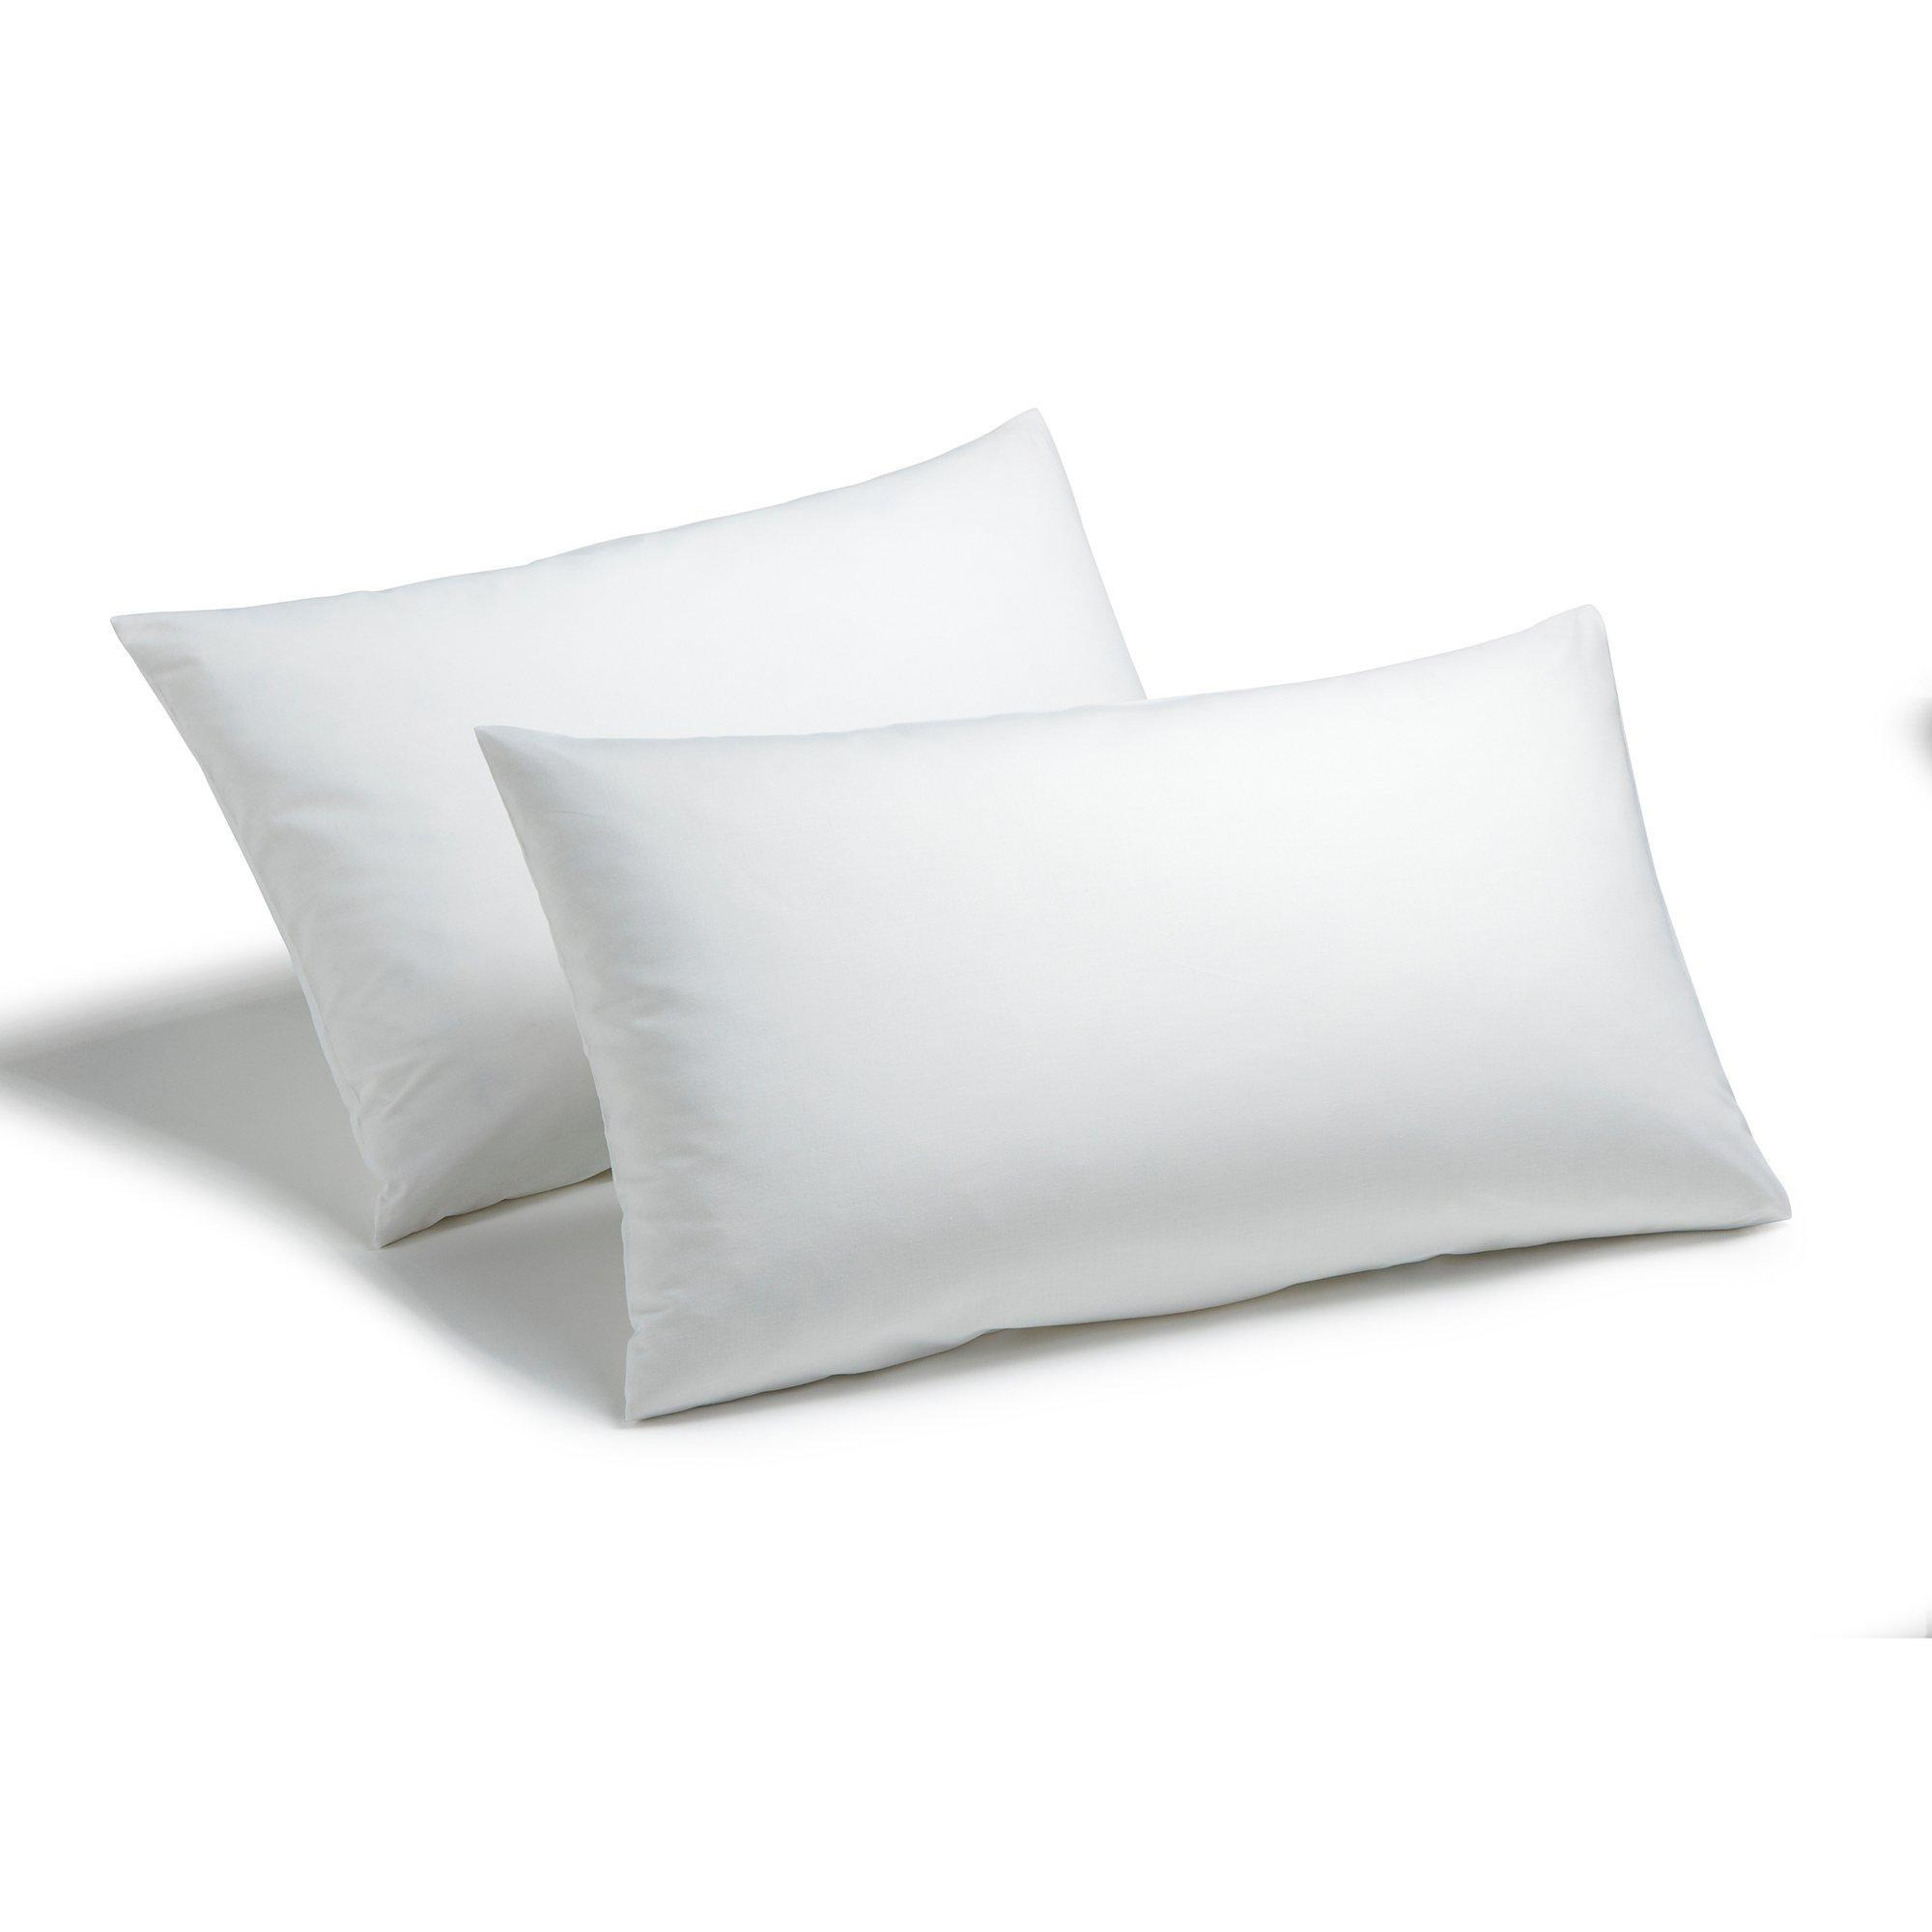 2 x Hollowfibre Pillow Pair with Polycotton Cover Thick Bounce Back Pillows - image 1